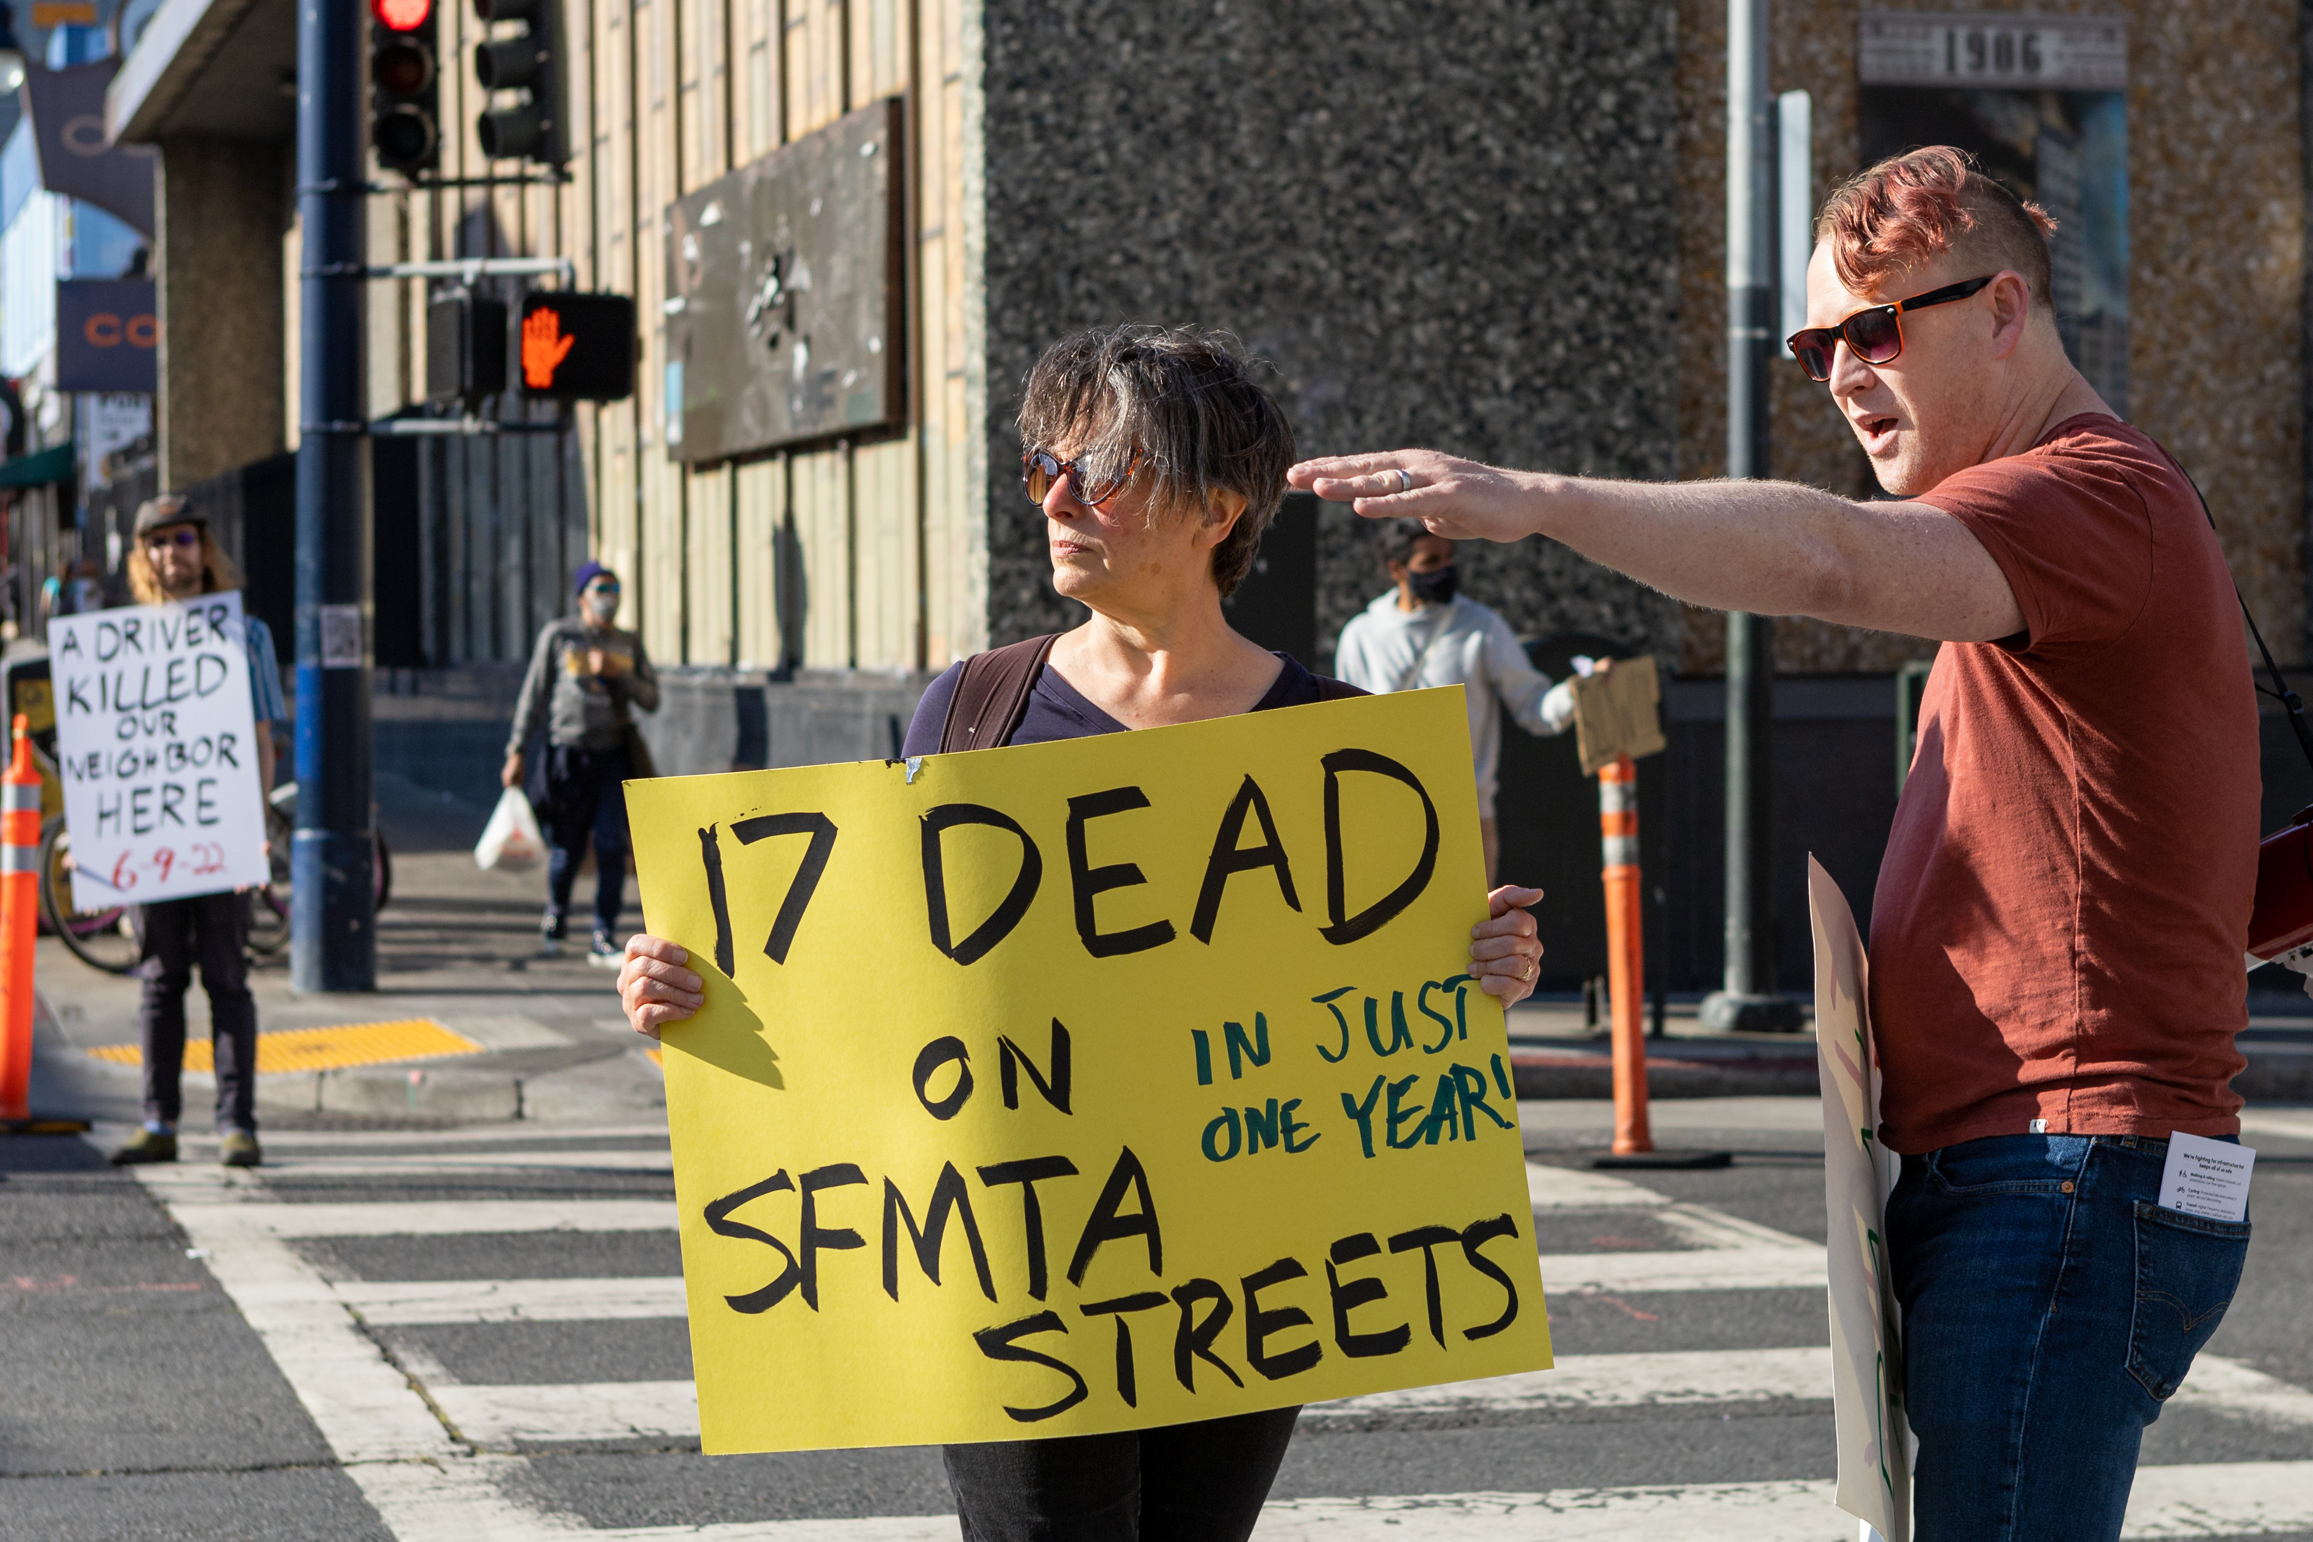 Two people stand on a city street and one person holds a sign that reads &quot;17 DEAD ON SFMA STREETS IN JUST ONE YEAR&quot;